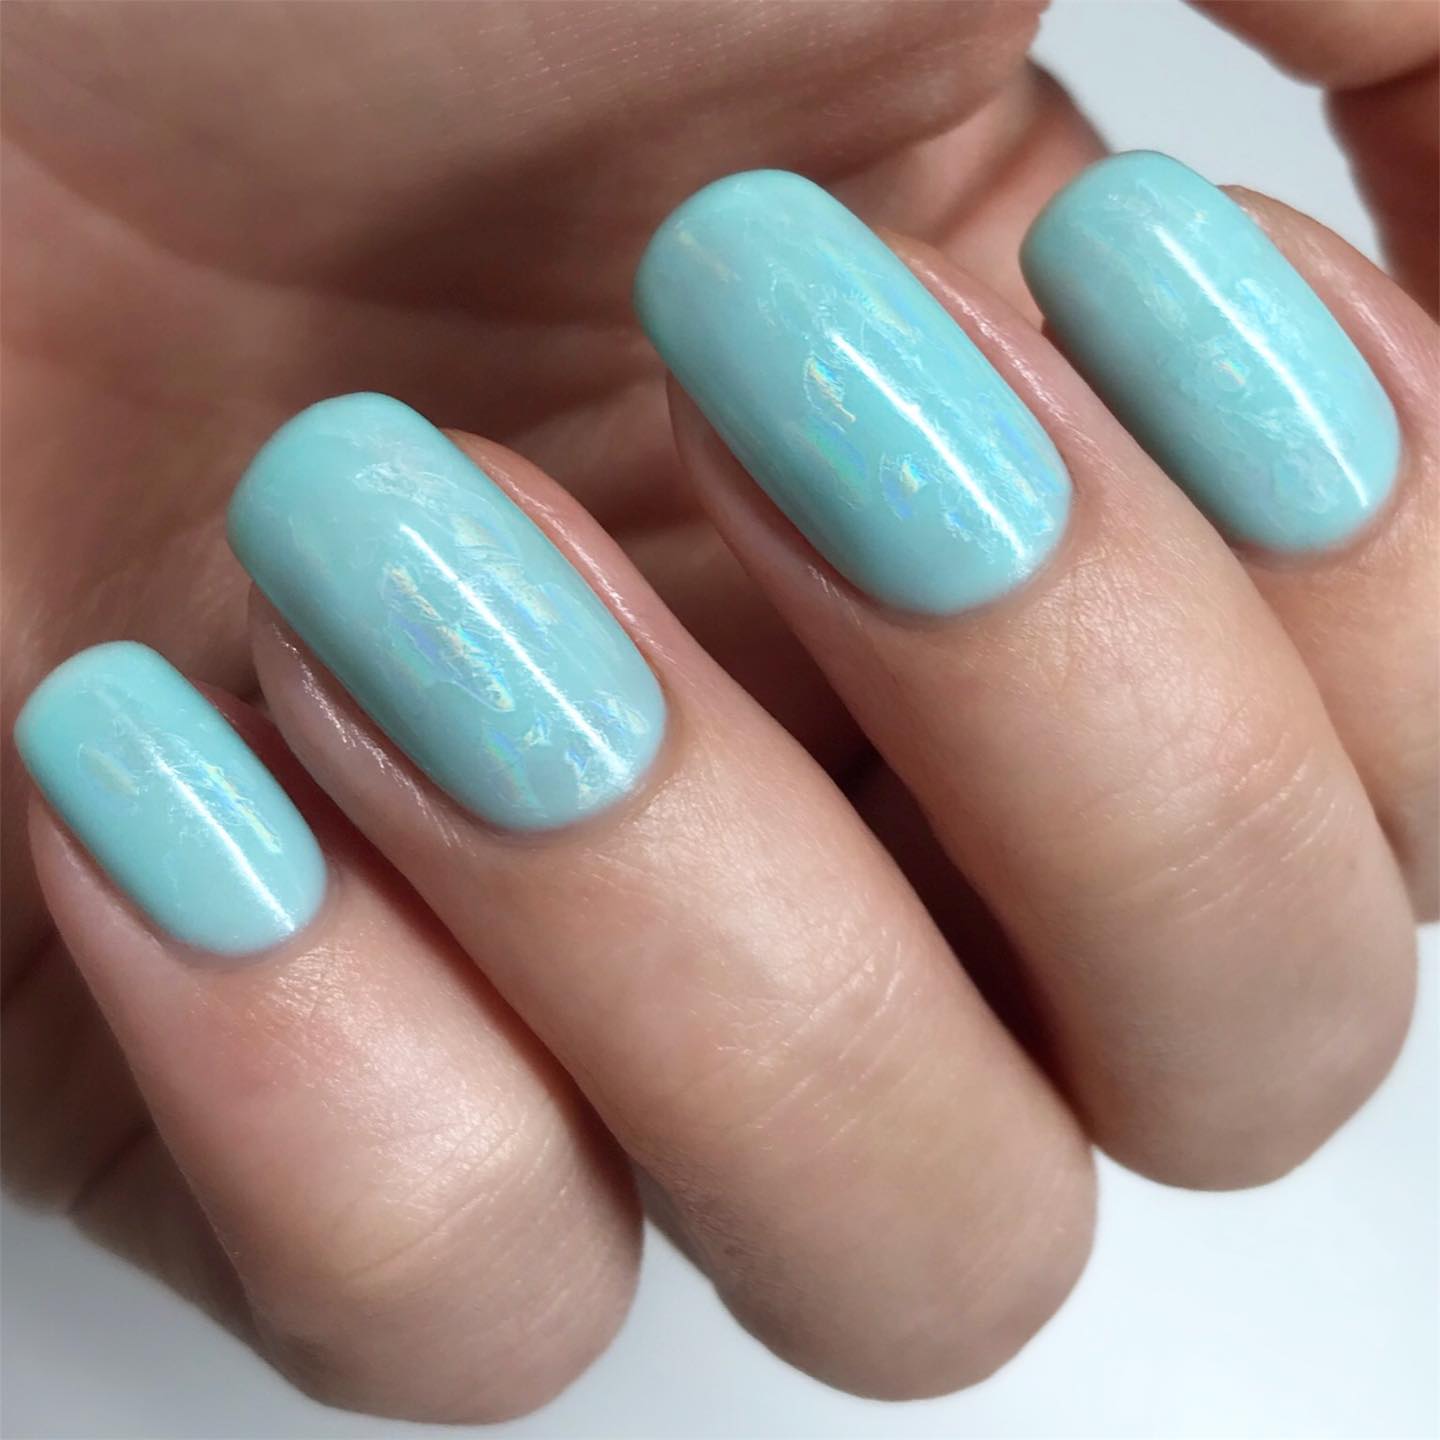 SEMILAC Extend 5in1 - 7 ml - No. 808 Pastel Mint